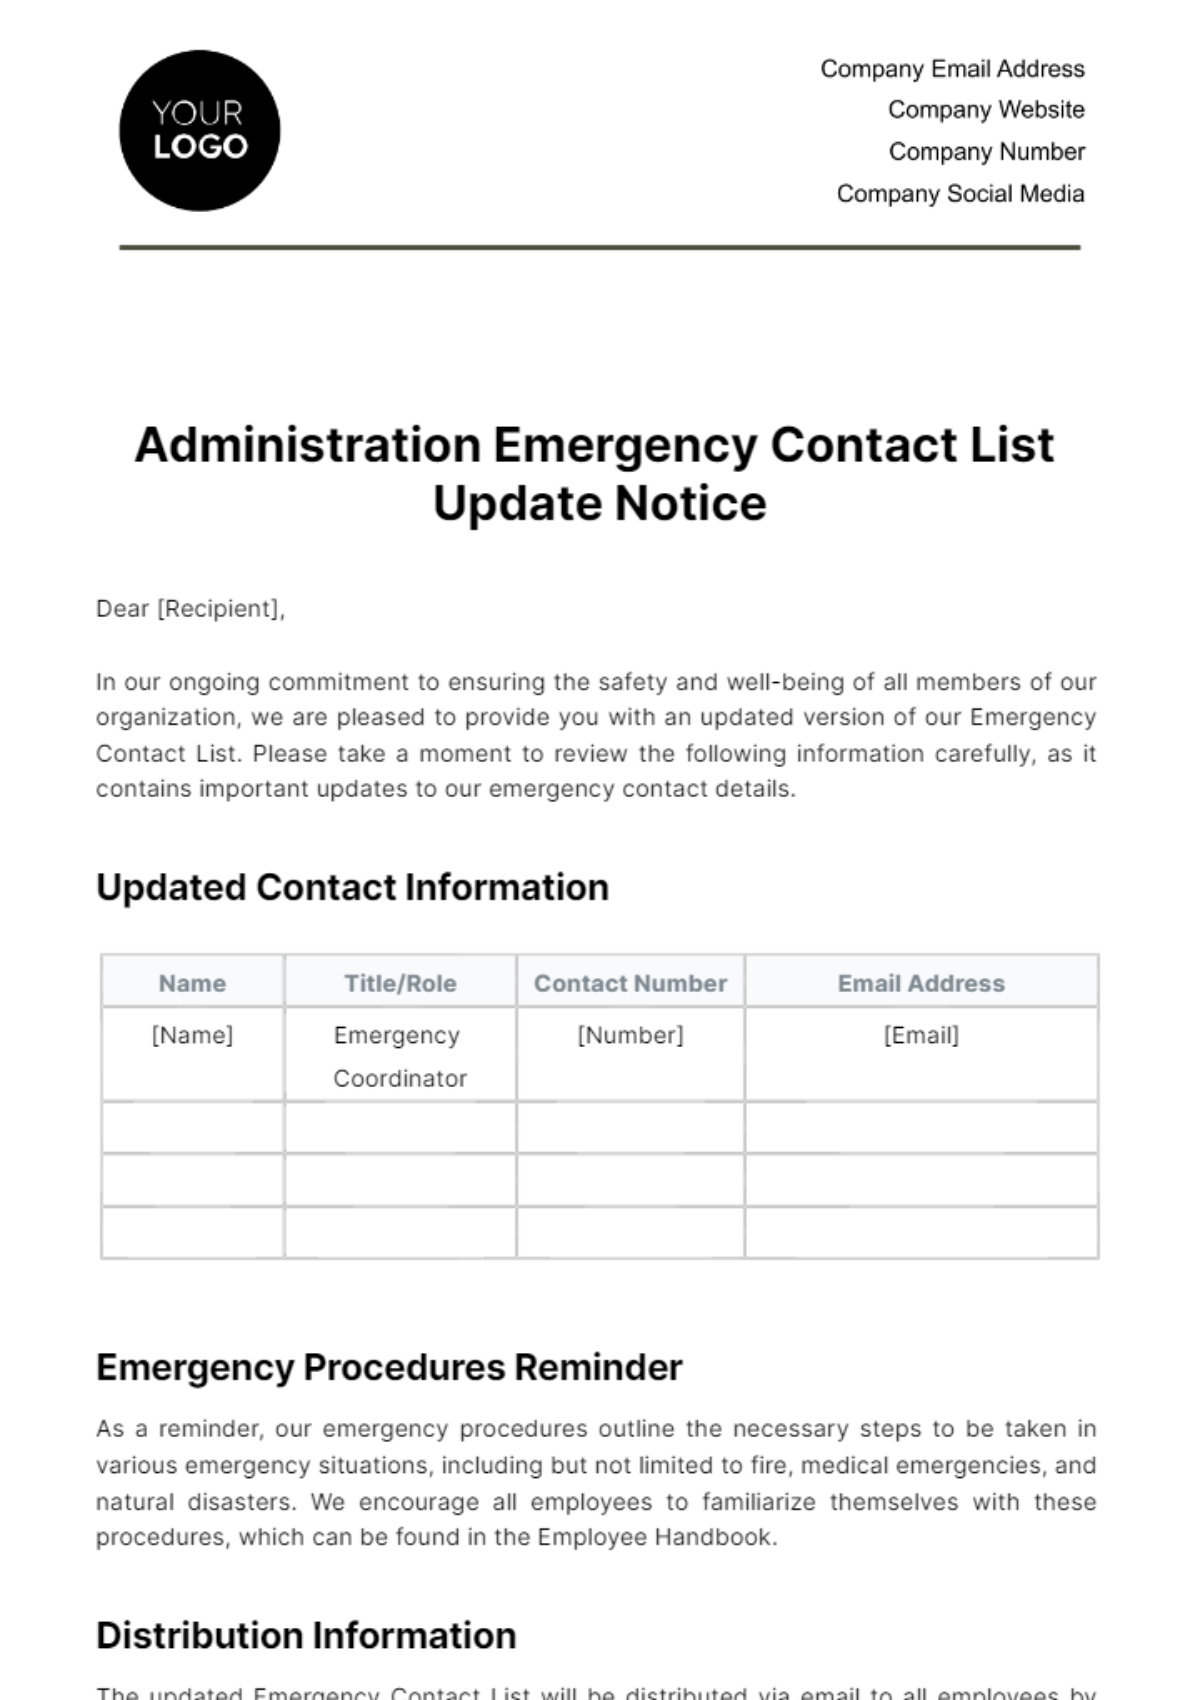 Free Administration Emergency Contact List Update Notice Template